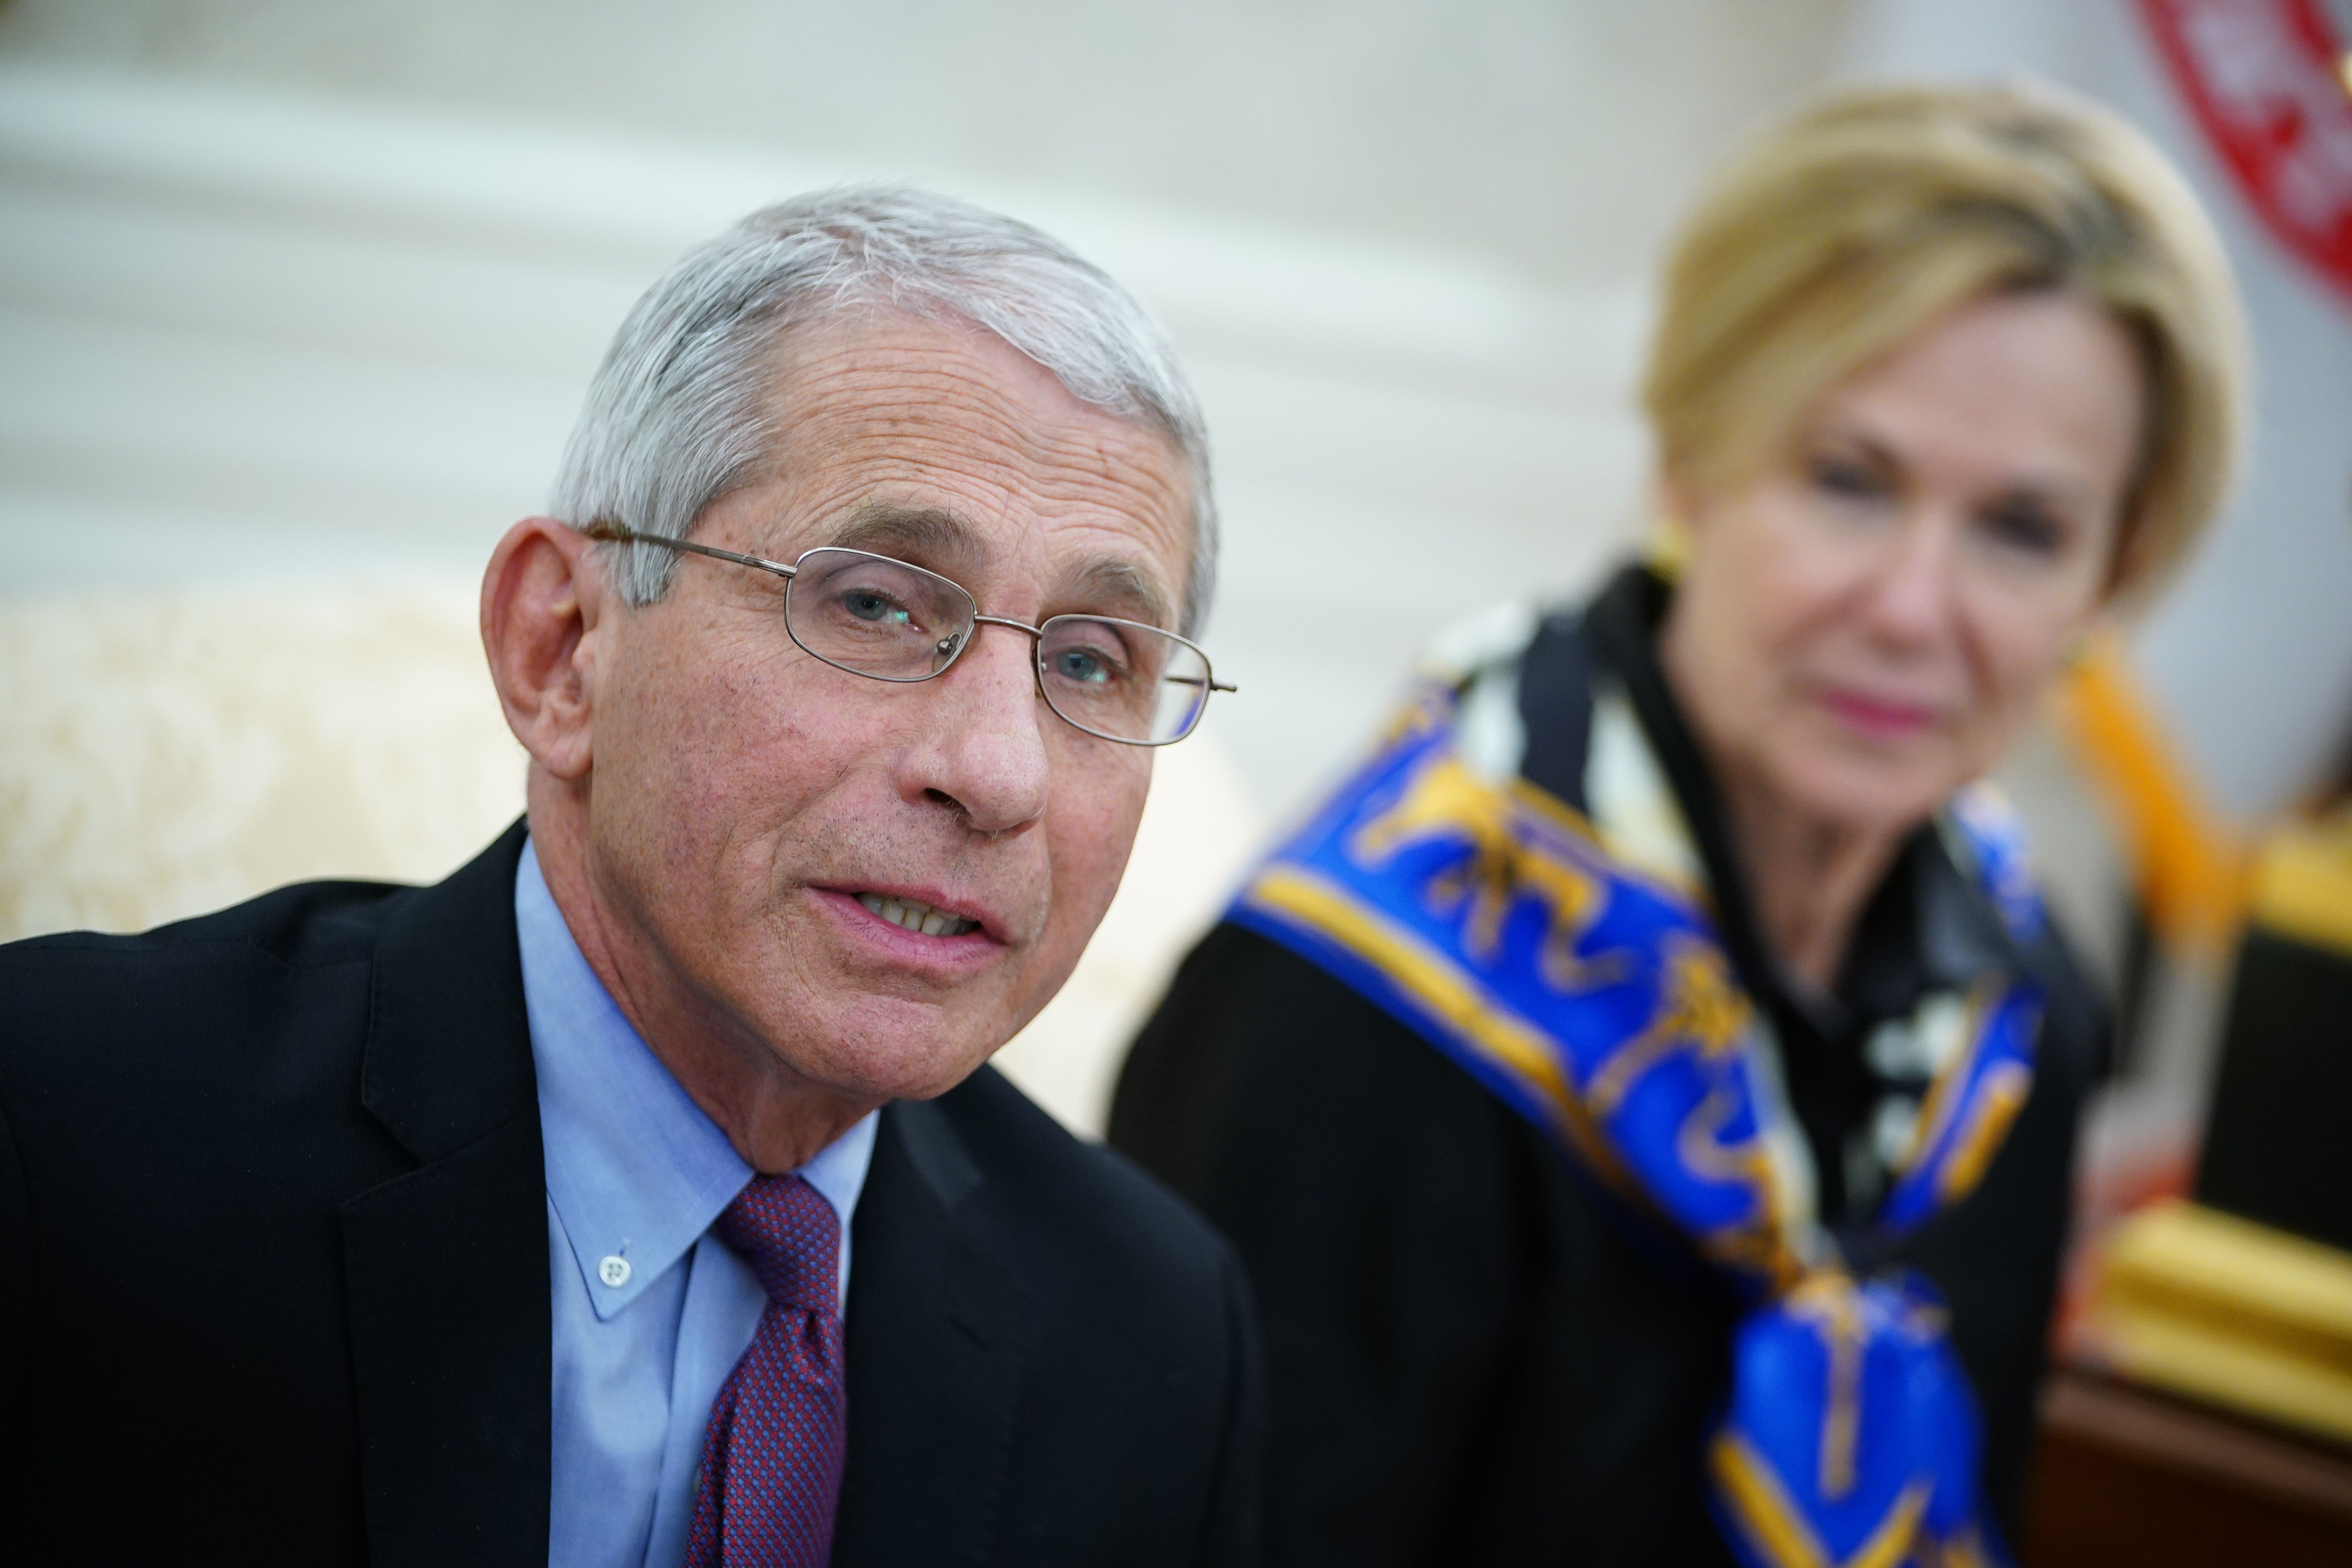 Dr. Anthony Fauci (L), director of the National Institute of Allergy and Infectious Diseases speaks as US President Donald Trump meets with Louisiana Governor John Bel Edwards(D-LA) in the Oval Office of the White House in Washington, DC on April 29, 2020. (Photo by MANDEL NGAN/AFP via Getty Images)